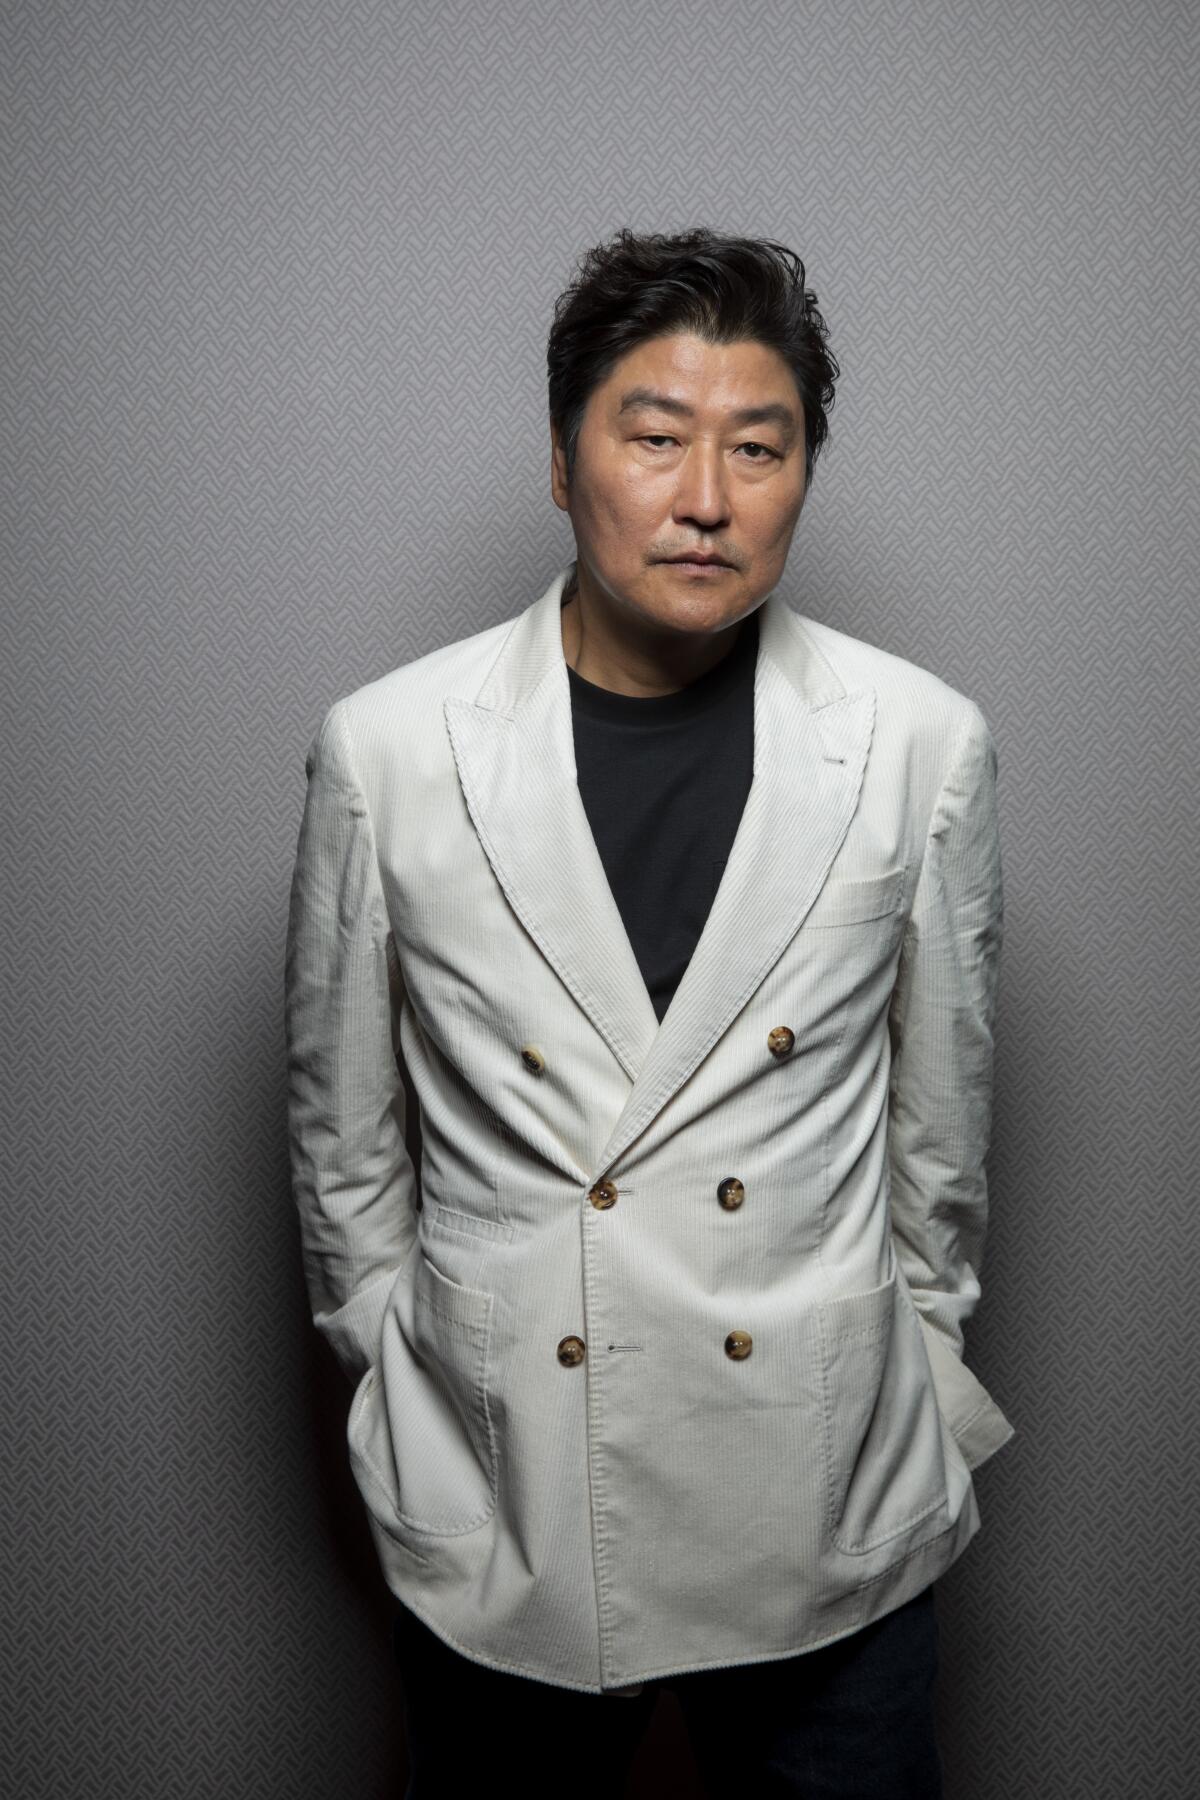 A man in a white blazer poses for the camera.